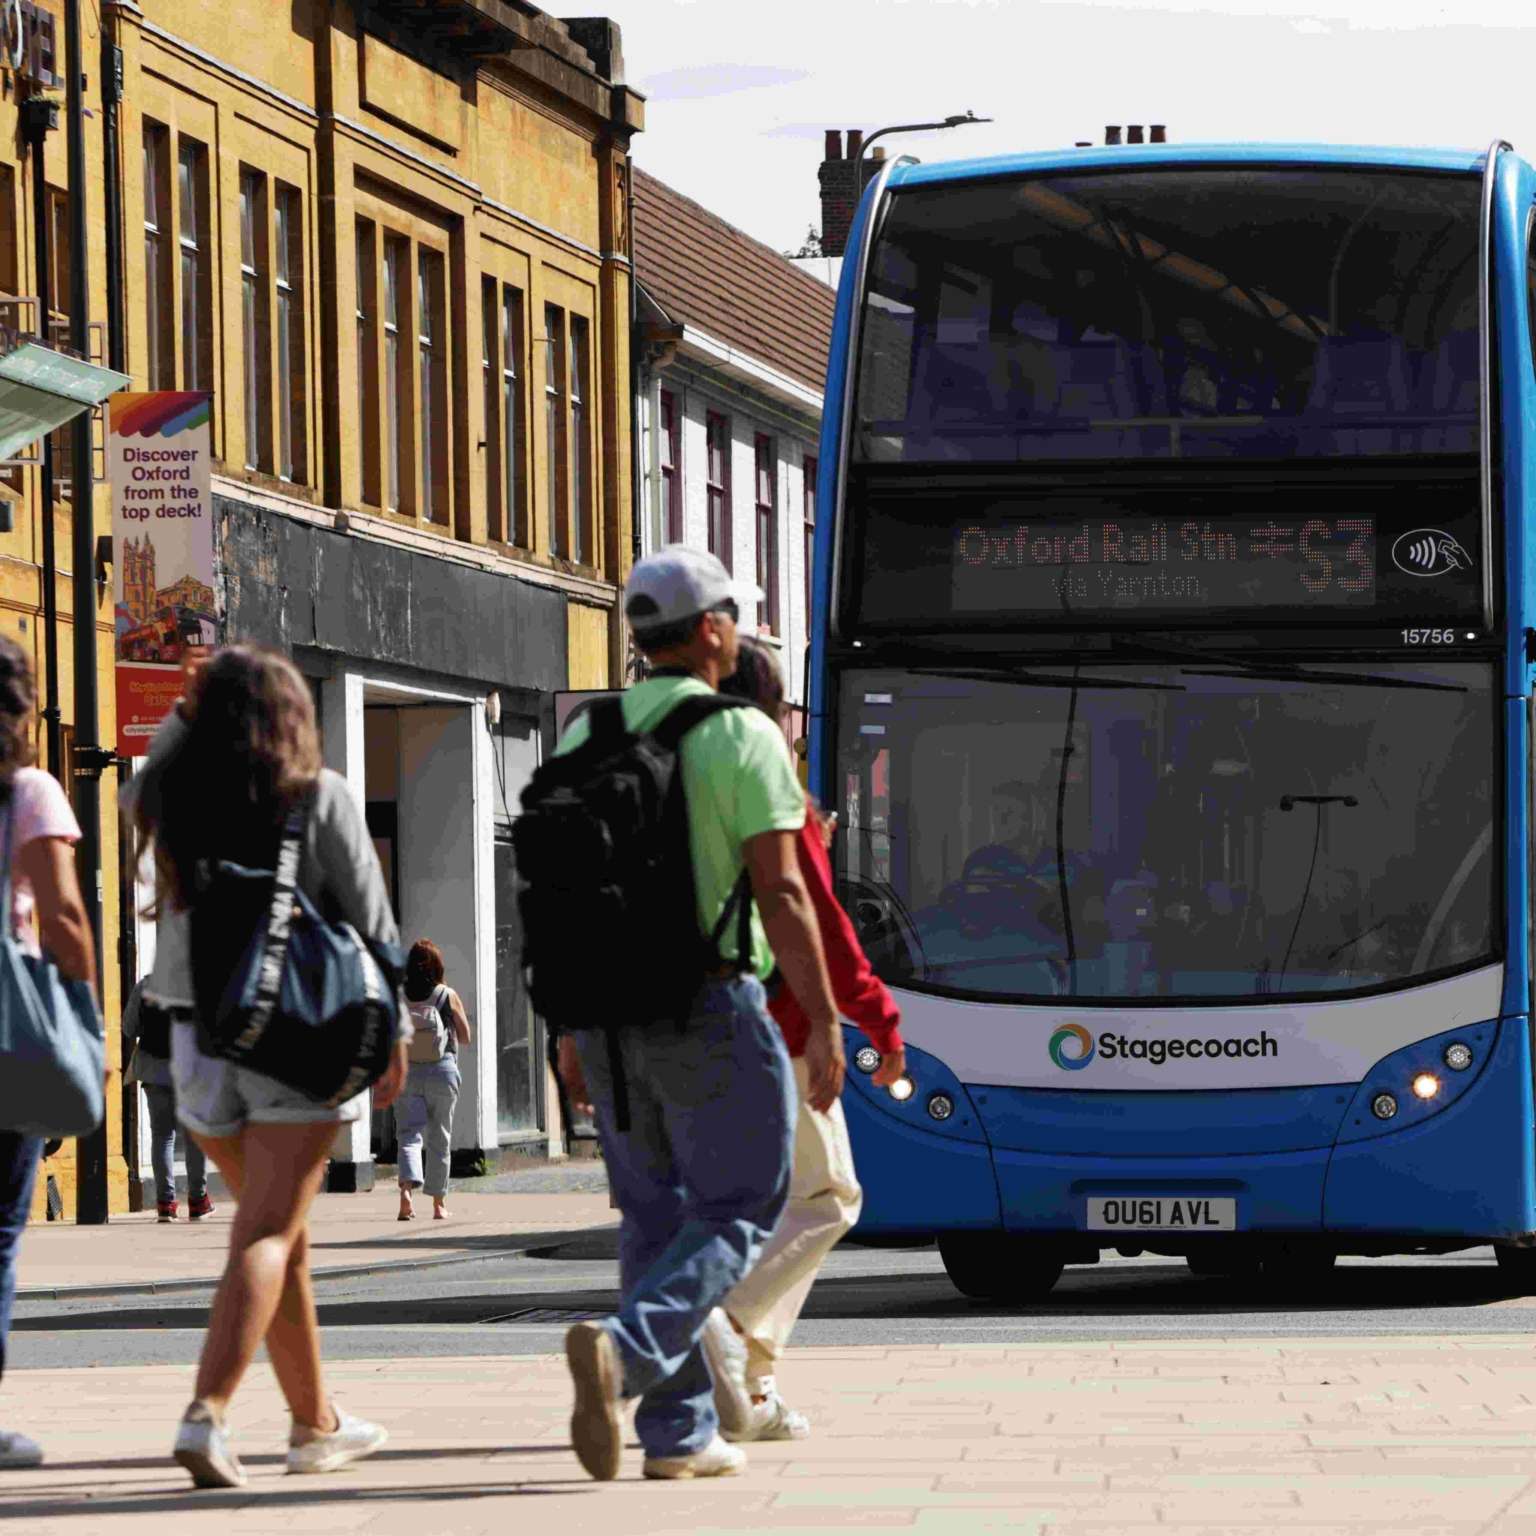 a bus and pedestrians in Oxford